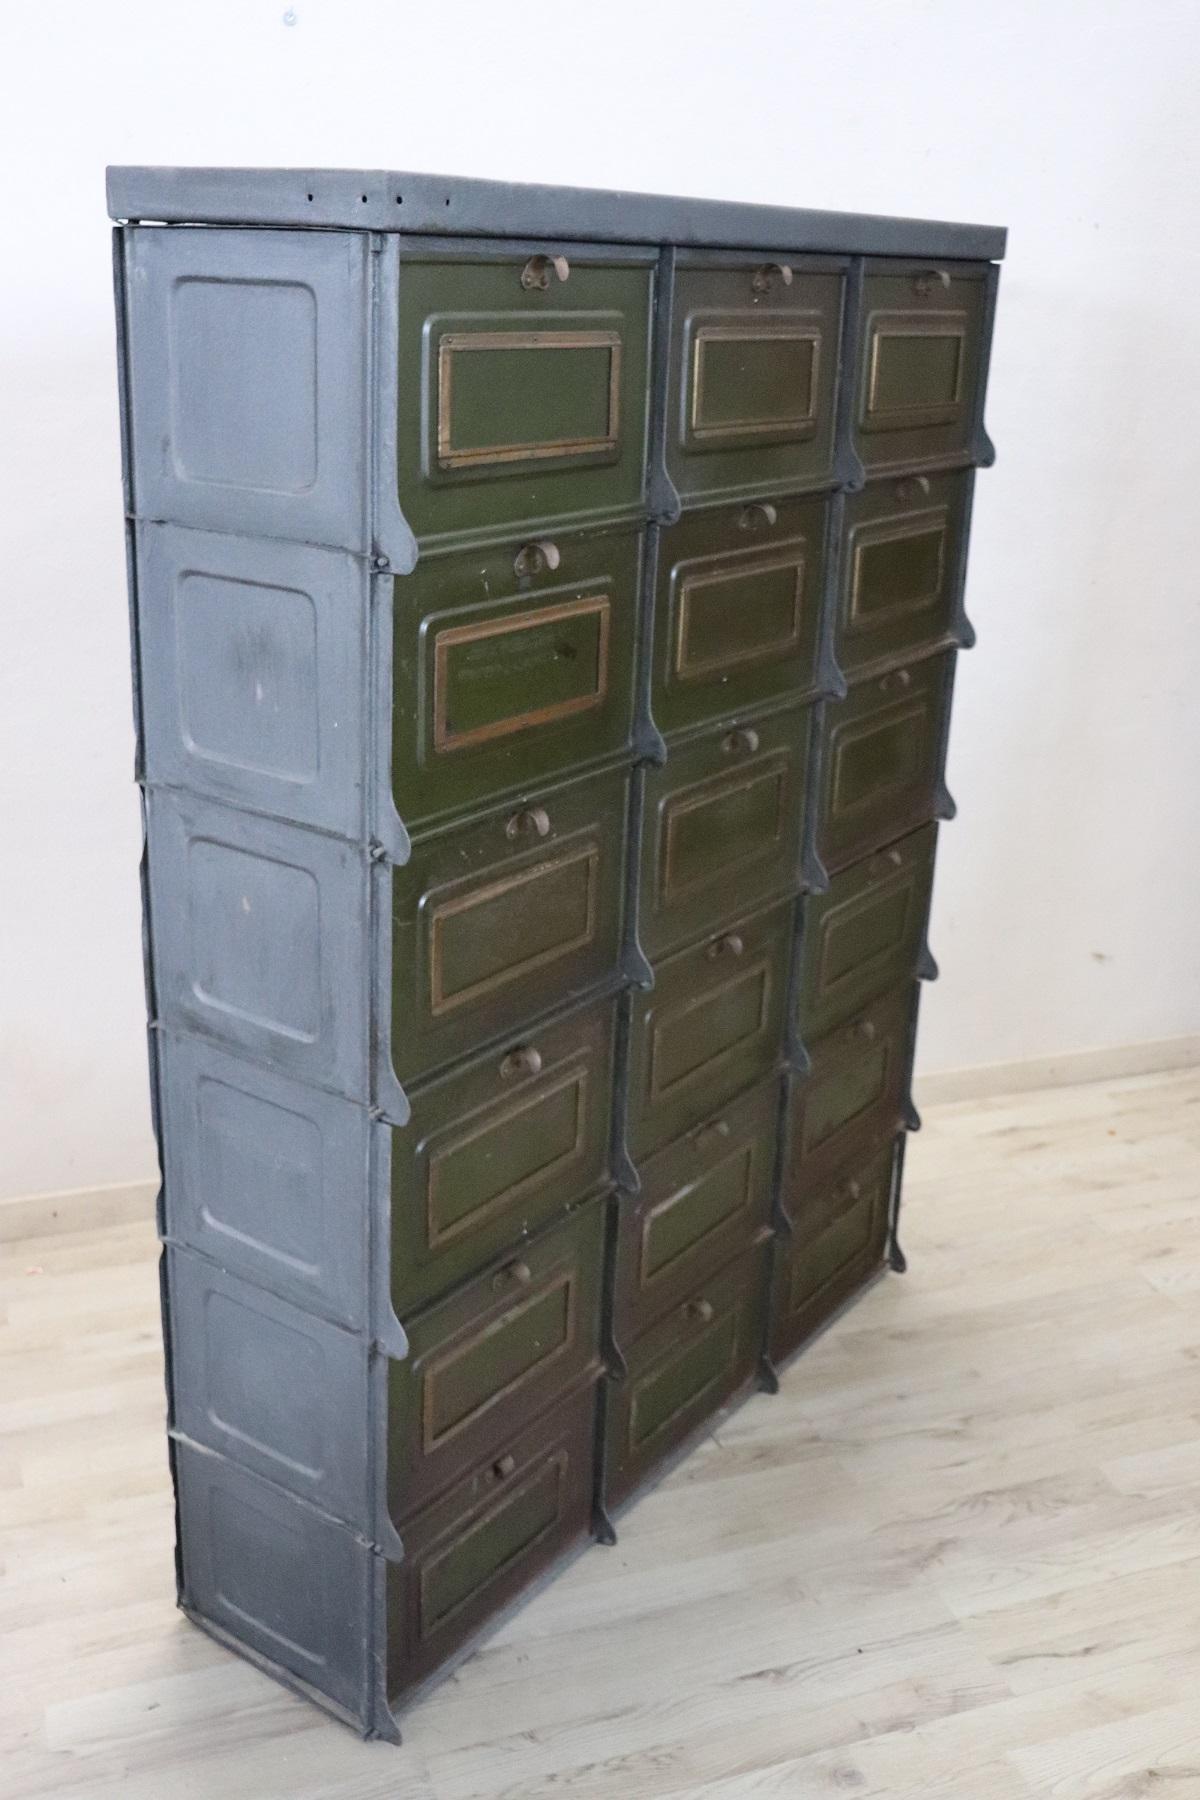 Italian industrial multi drawers metal apothecary cabinet, 1940s. Equipped with sixteen comfortable drawers. Condition used.